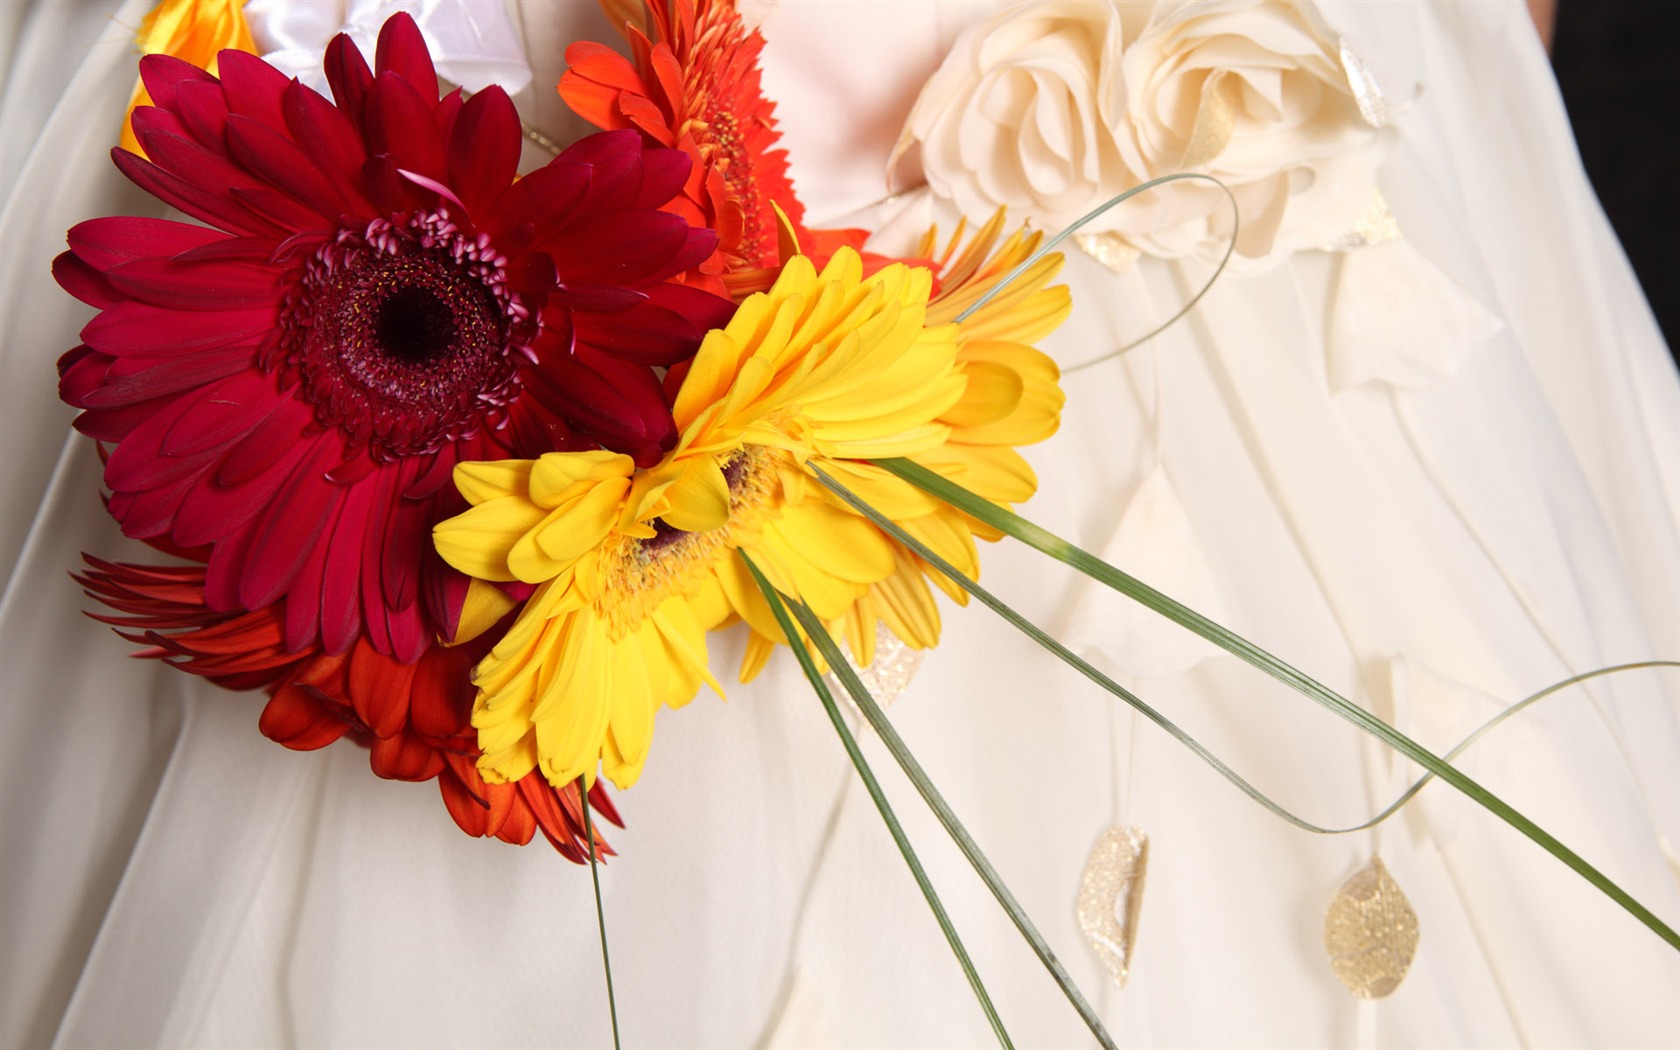 Weddings and Flowers wallpaper (2) #8 - 1680x1050